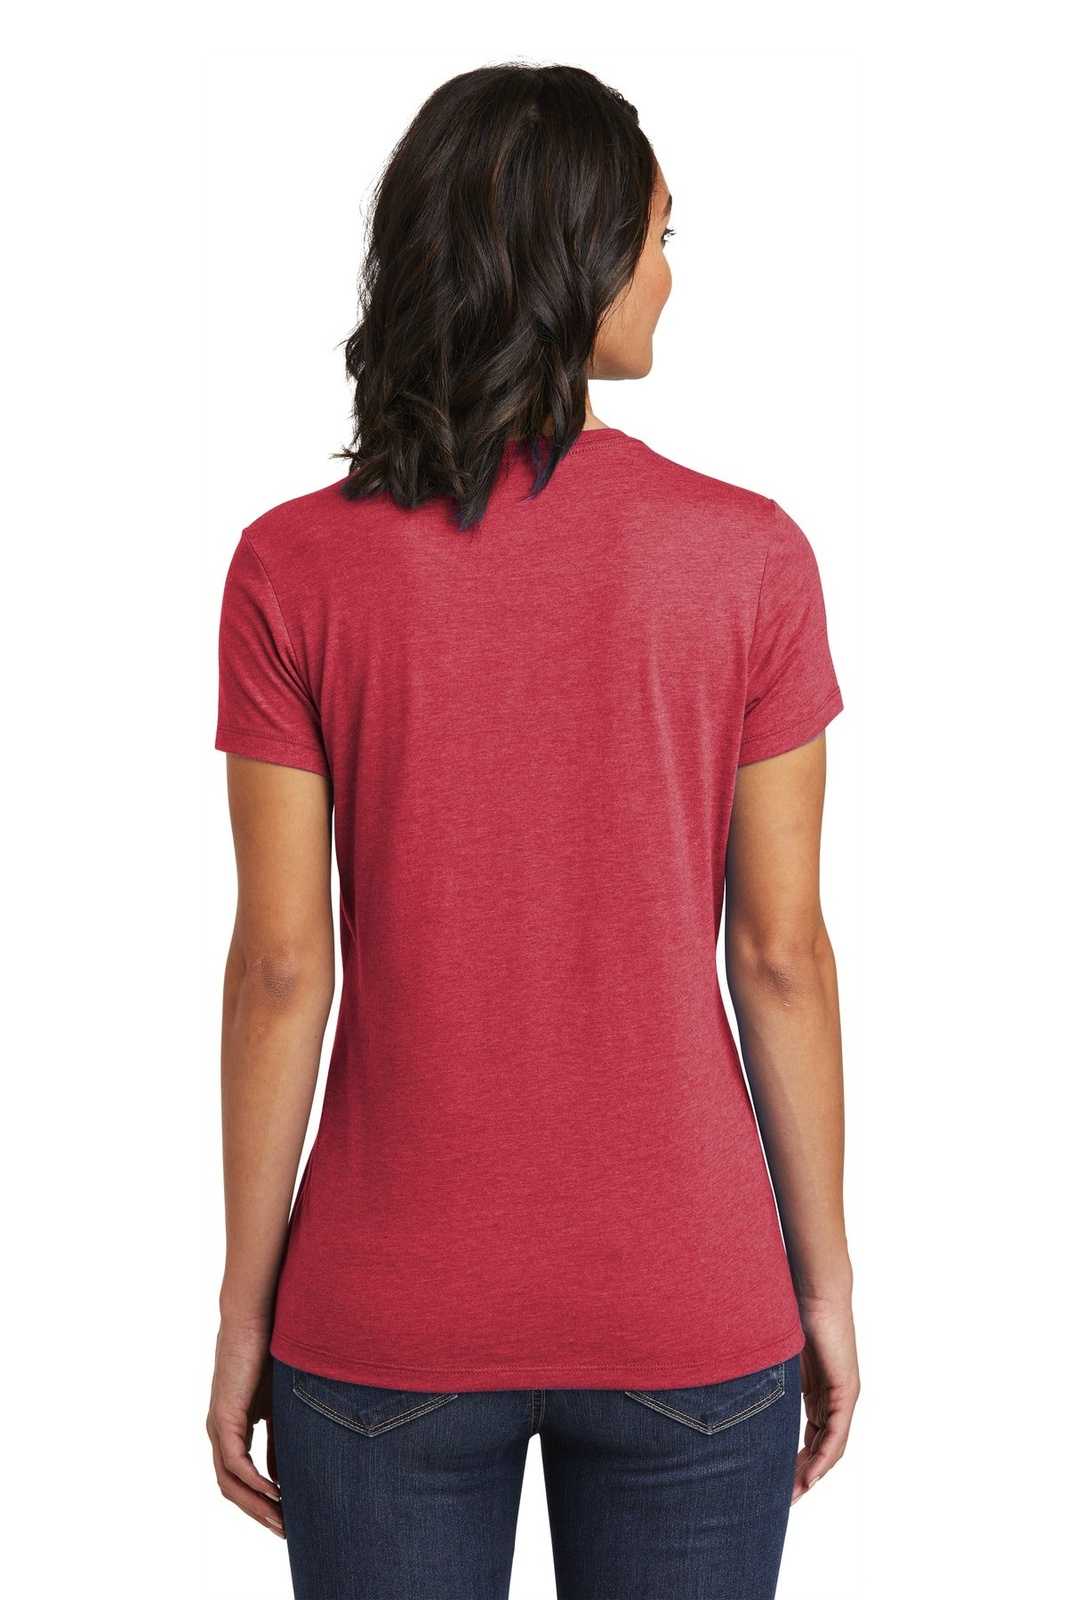 District DT6002 Women's Very Important Tee - Heathered Red - HIT a Double - 1